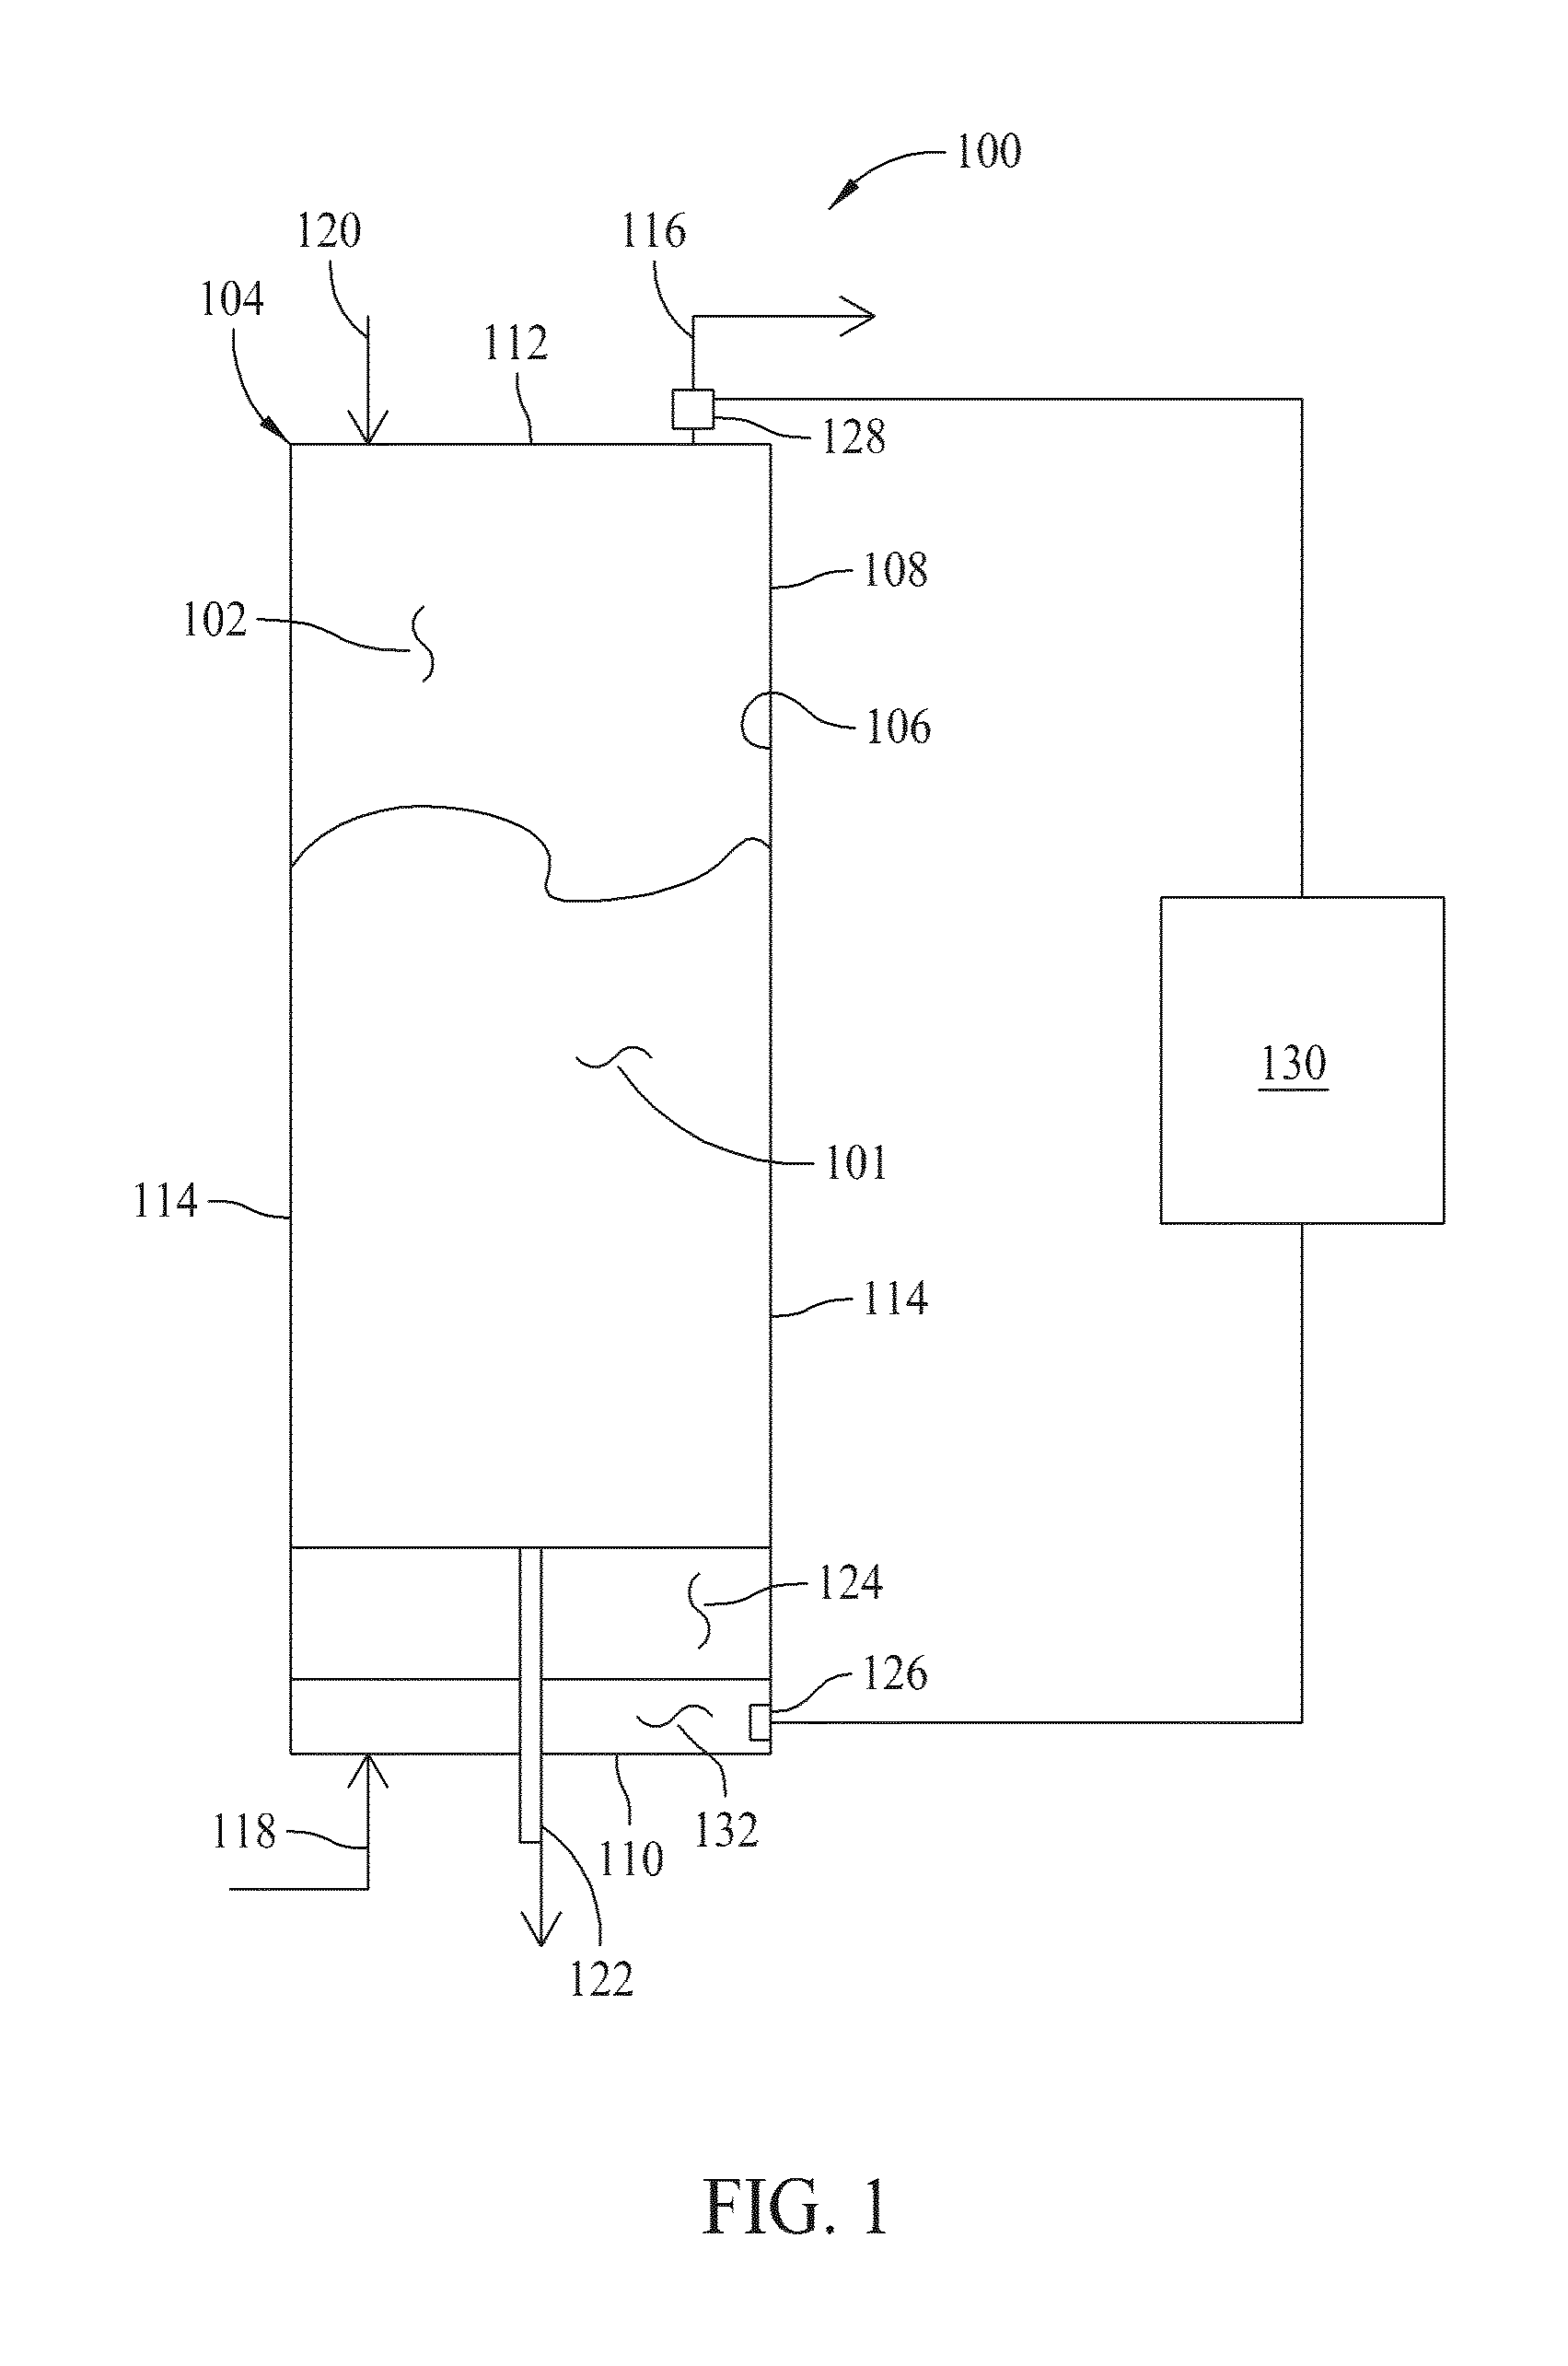 Systems and methods for particle size determination and control in a fluidized bed reactor